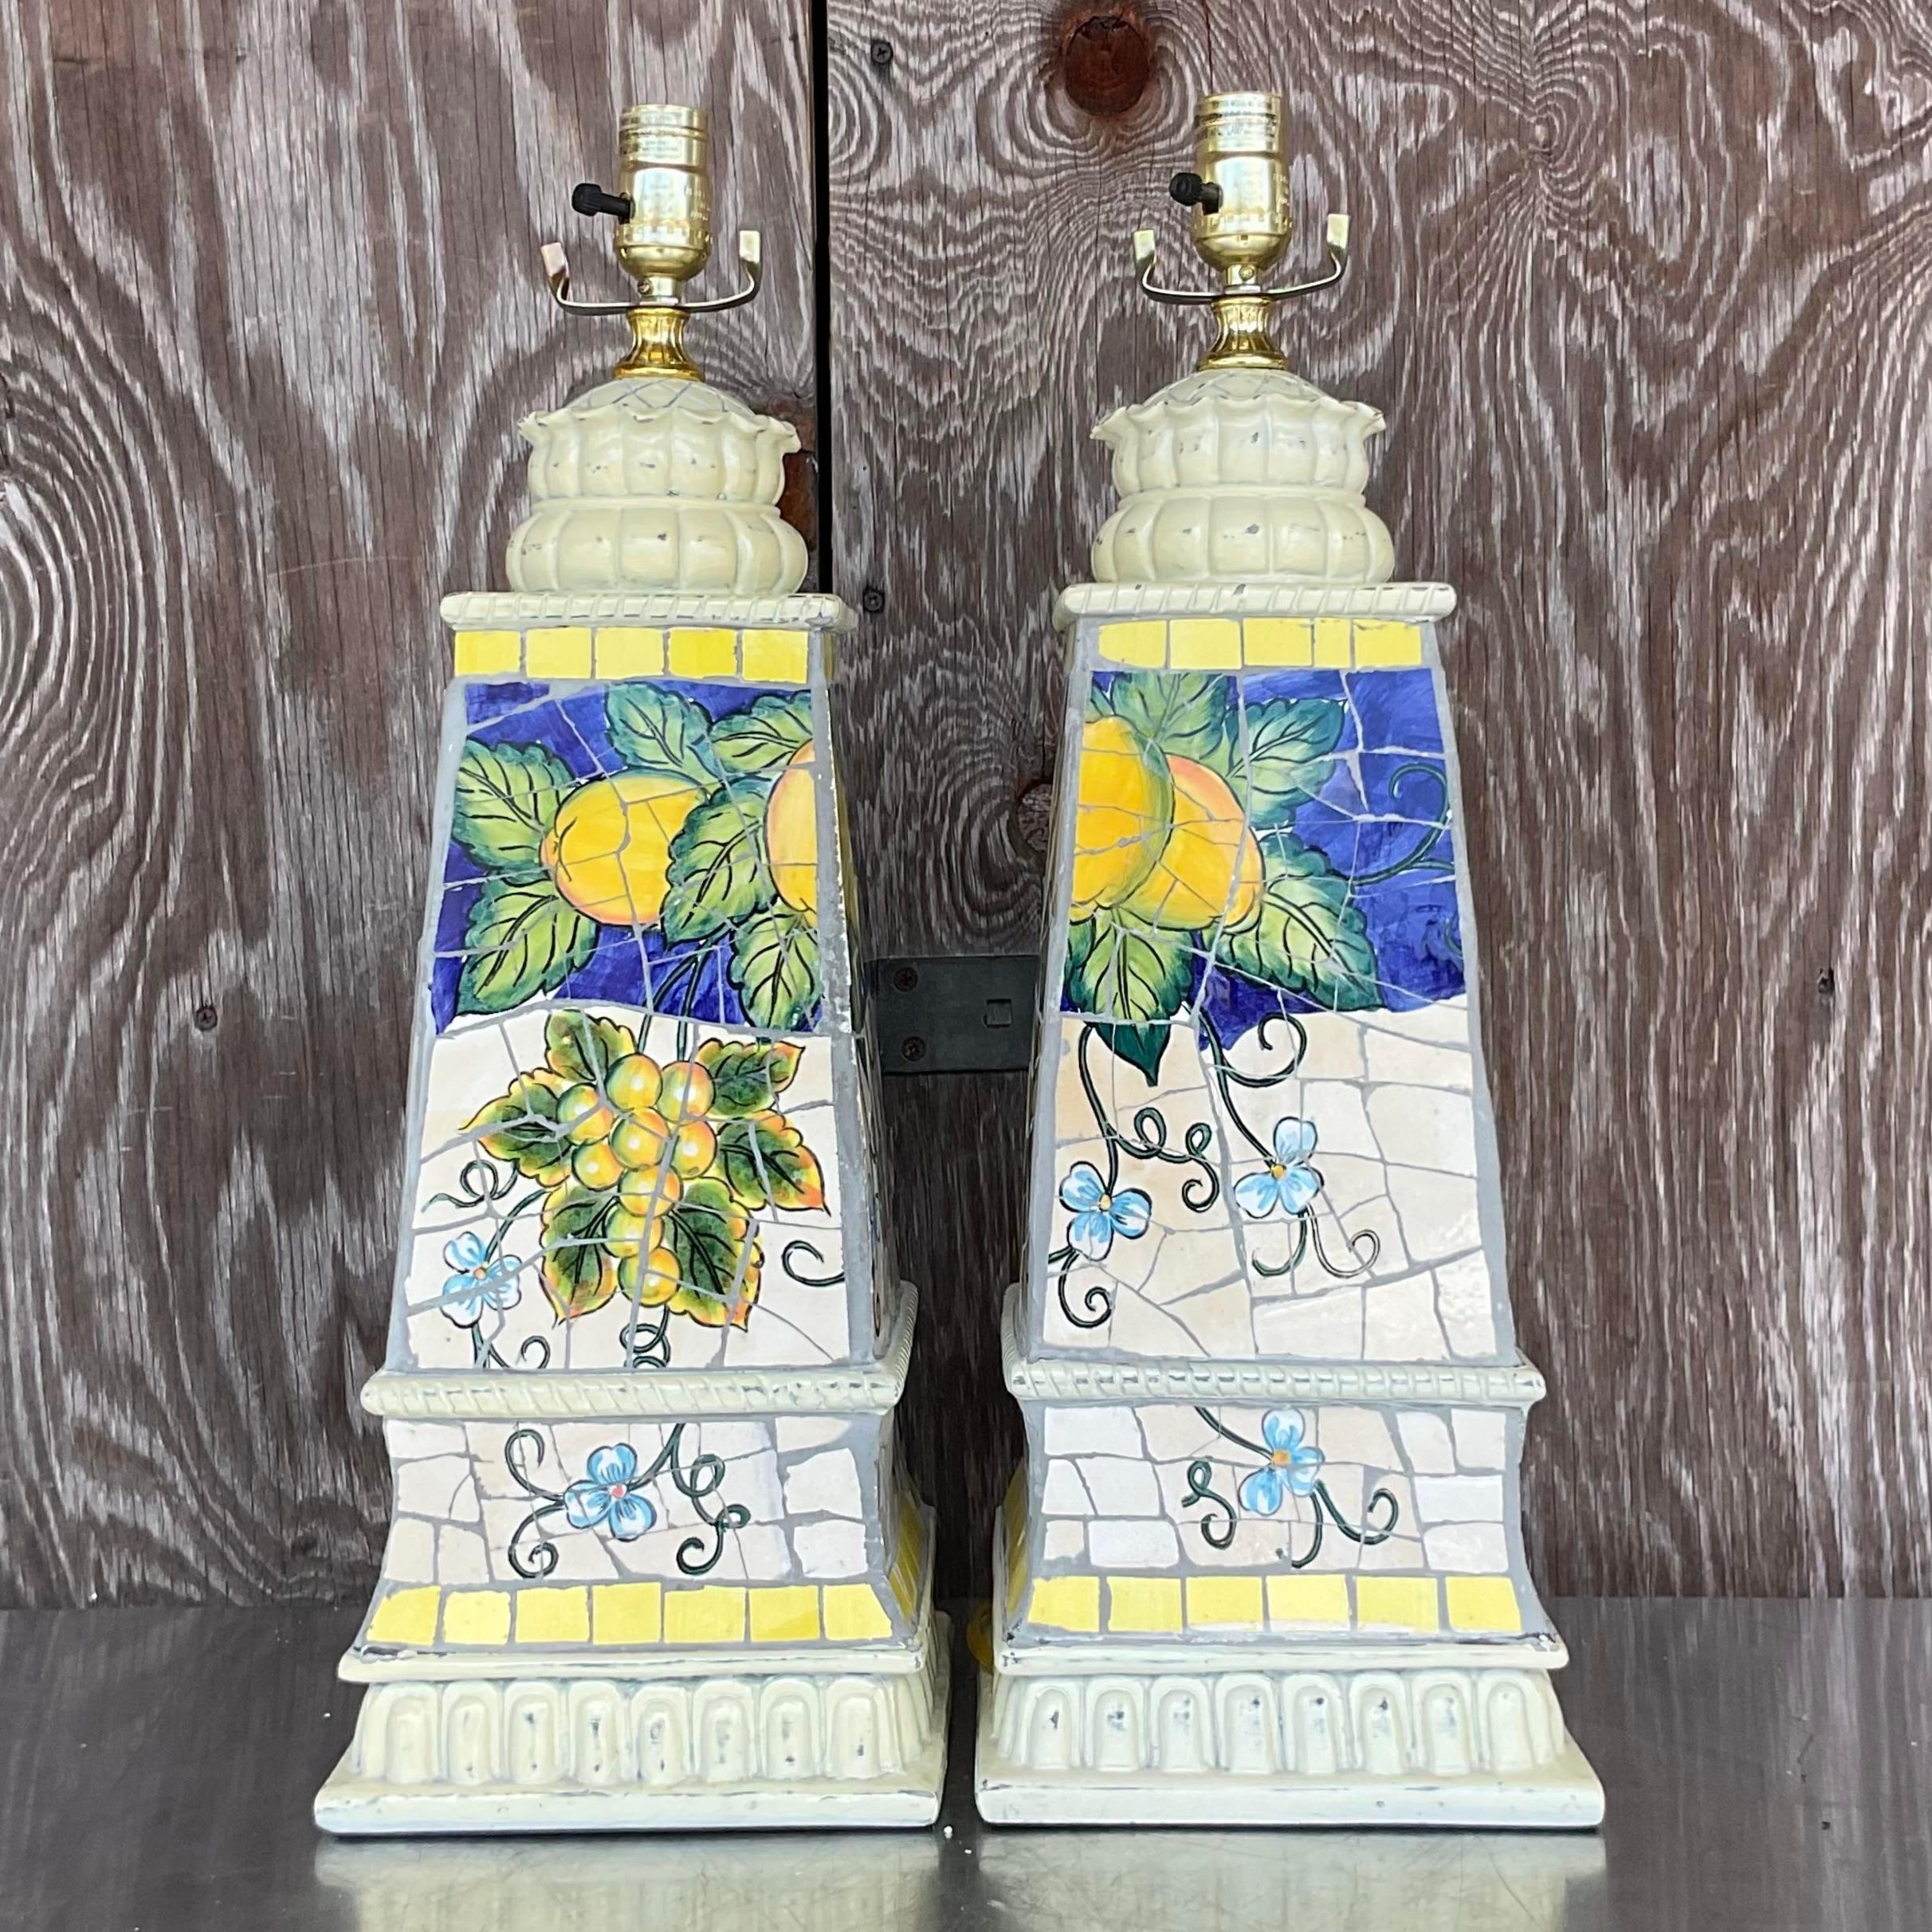 A beautiful pair of vintage cracked tile lamps with a lemon design on them. Acquired at a Palm Beach estate.